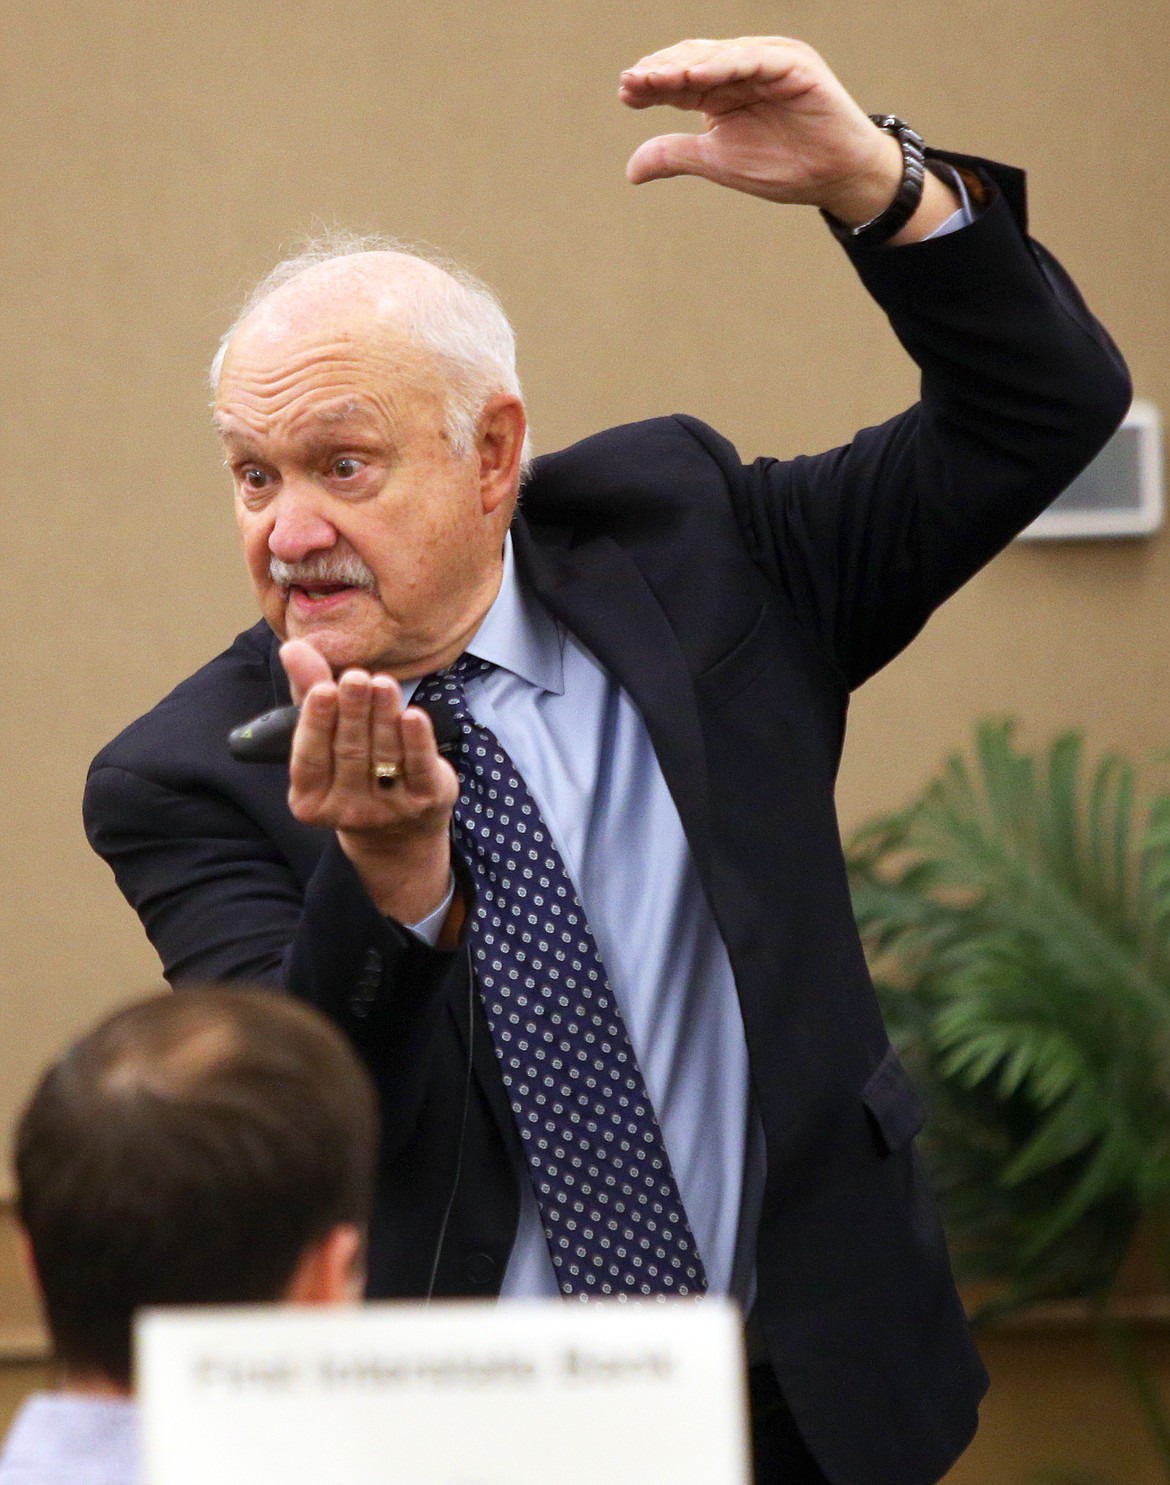 Economist John Mitchell gives his economic forecast for 2022 on Tuesday during a presentation before the Coeur d'Alene Regional Chamber at The Best Western Plus Coeur d'Alene Inn.